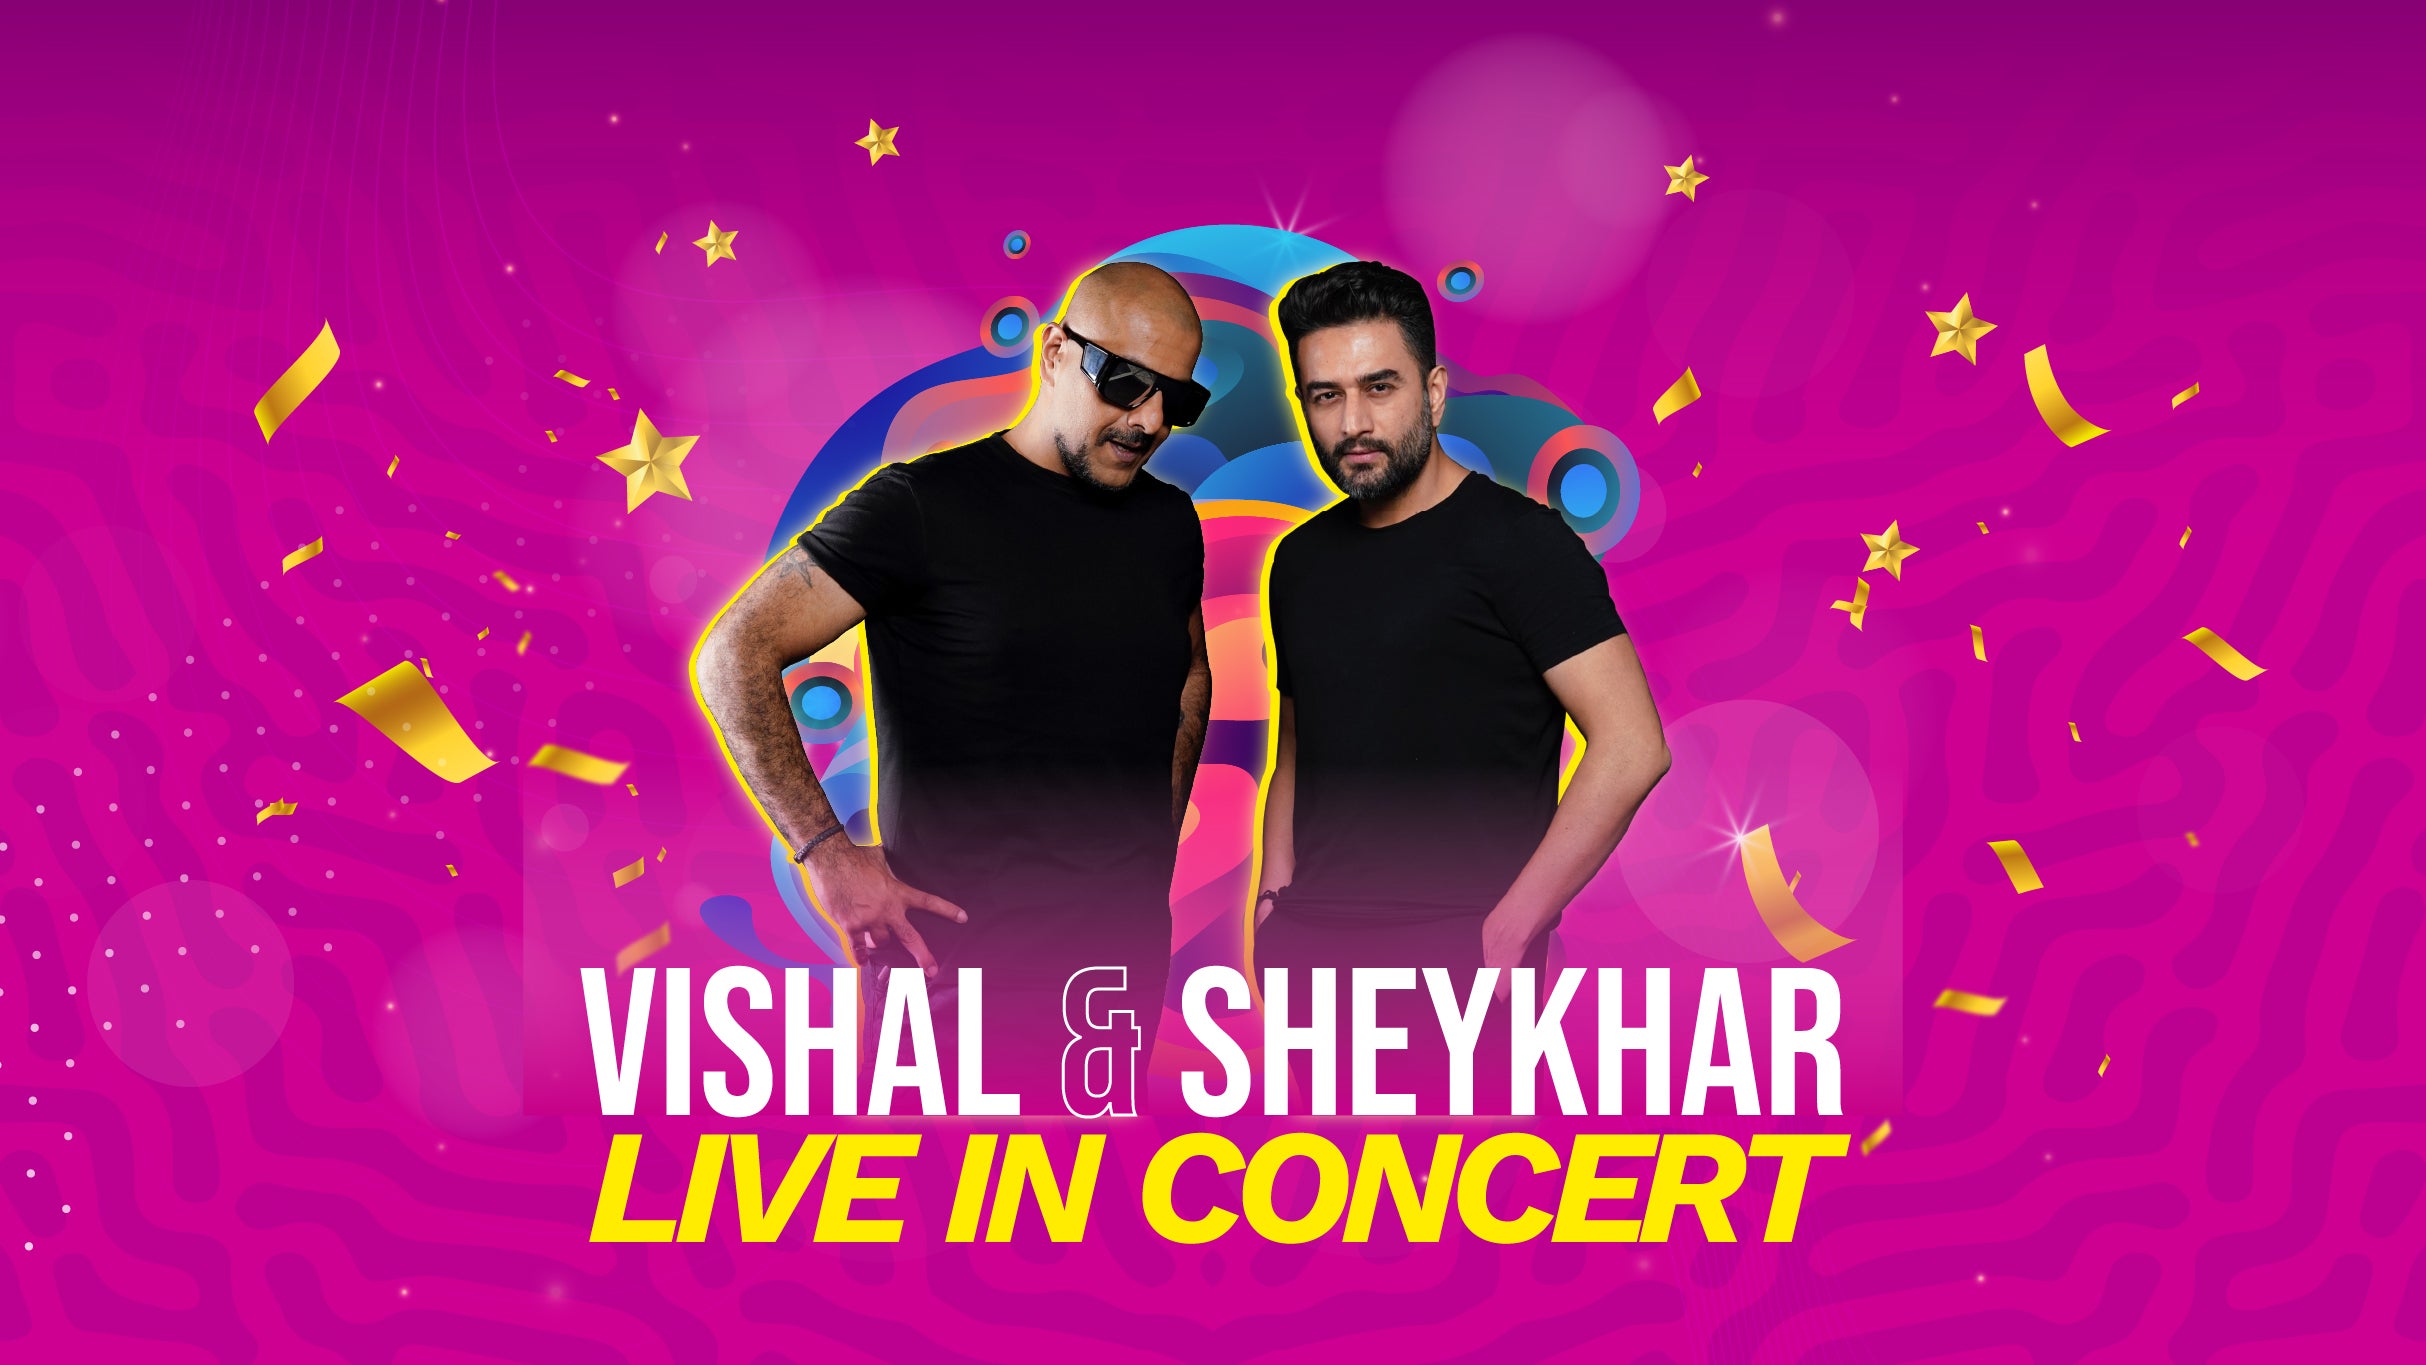  Vishal and Sheykhar - Event Moved to FirstOntario Concert Hall in Hamilton promo photo for Artist presale offer code